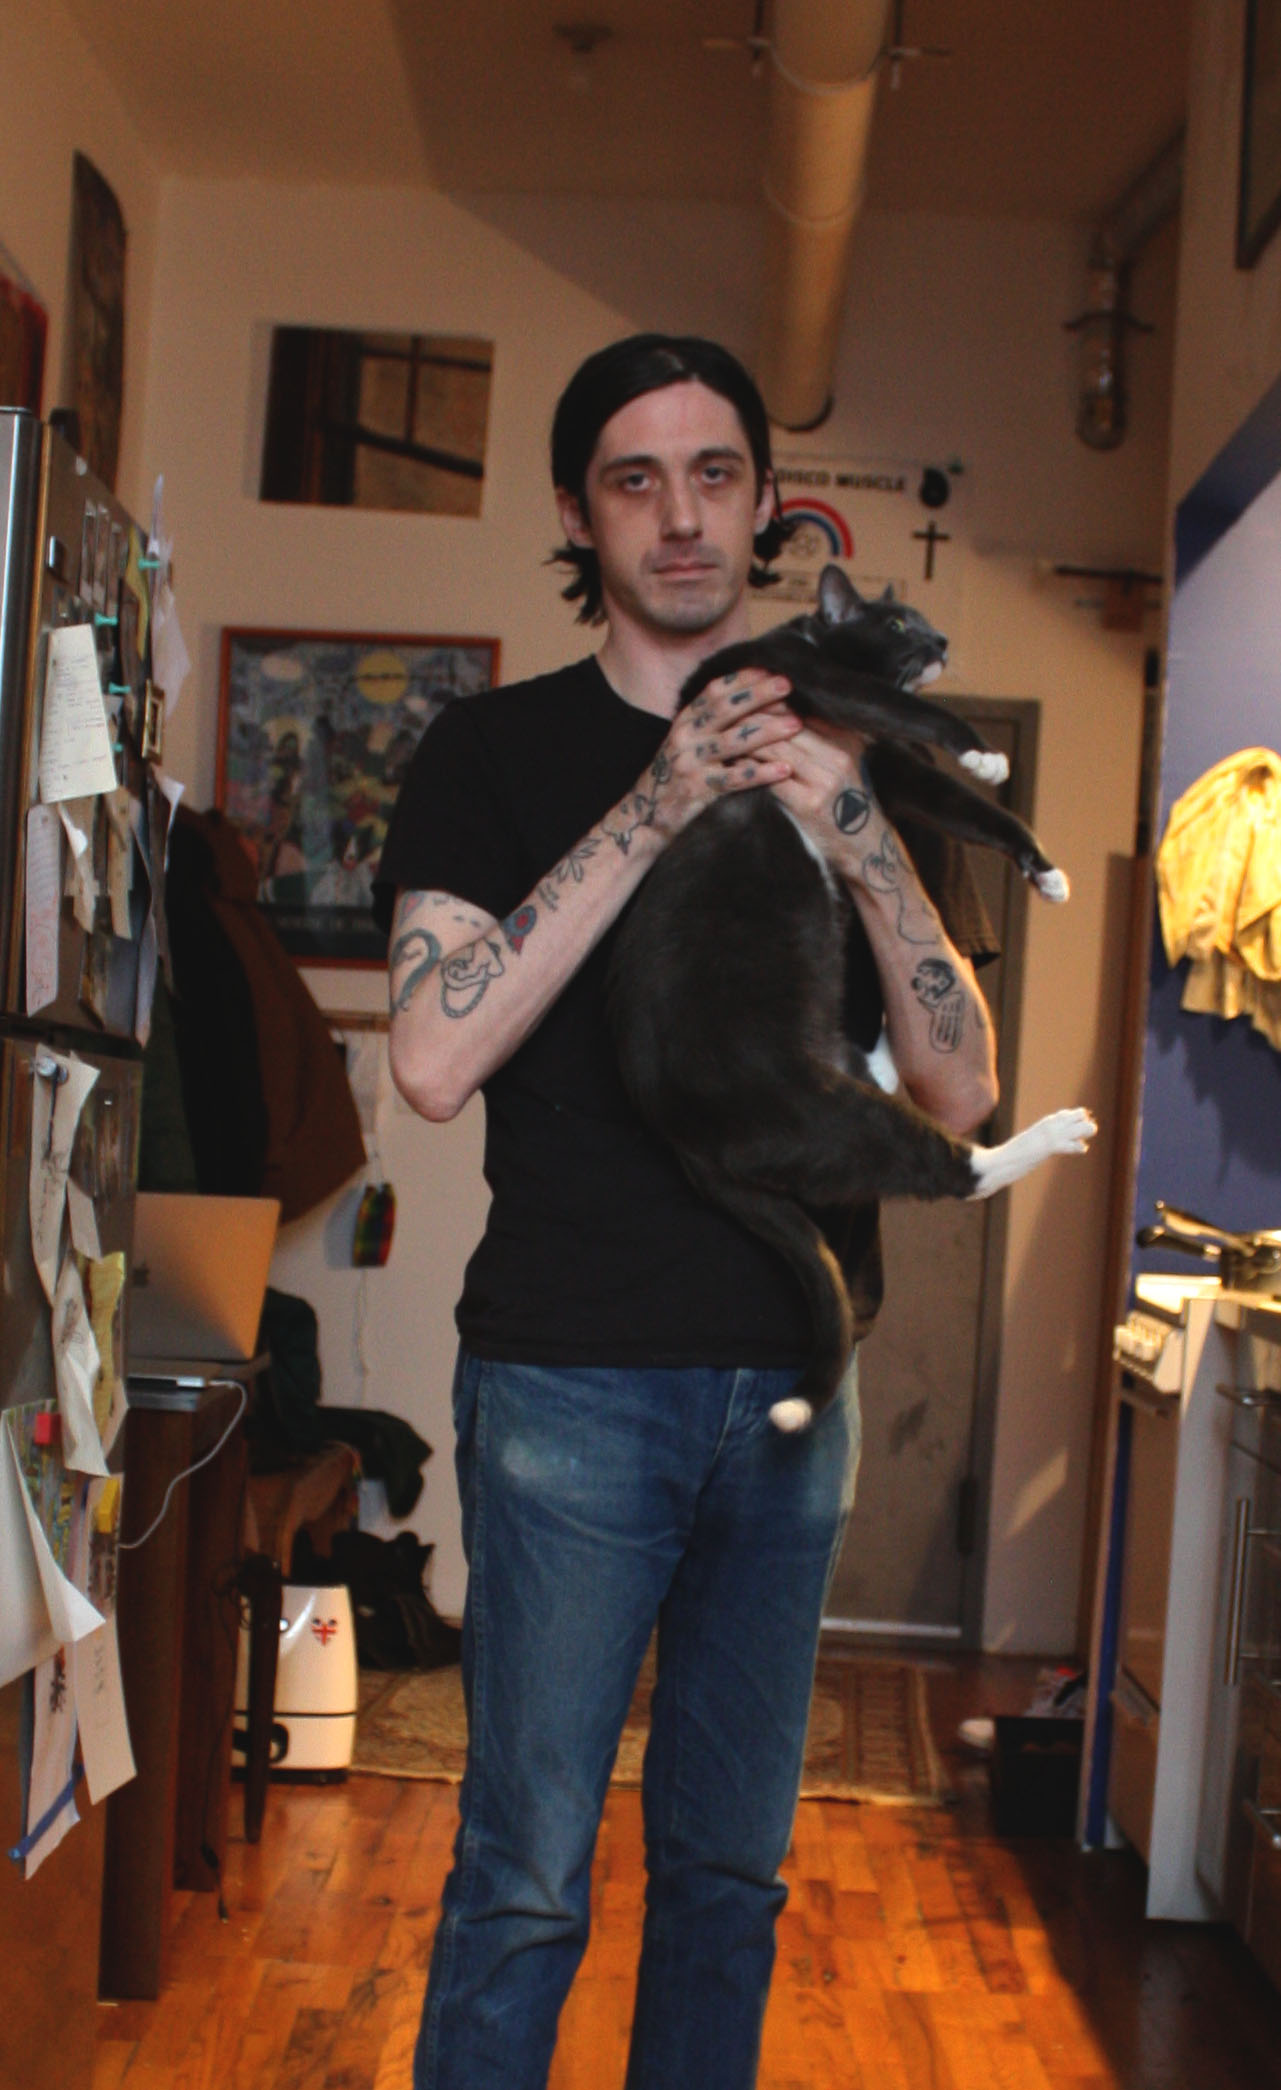 Abe Lampert holding cat standing in room with wood floor